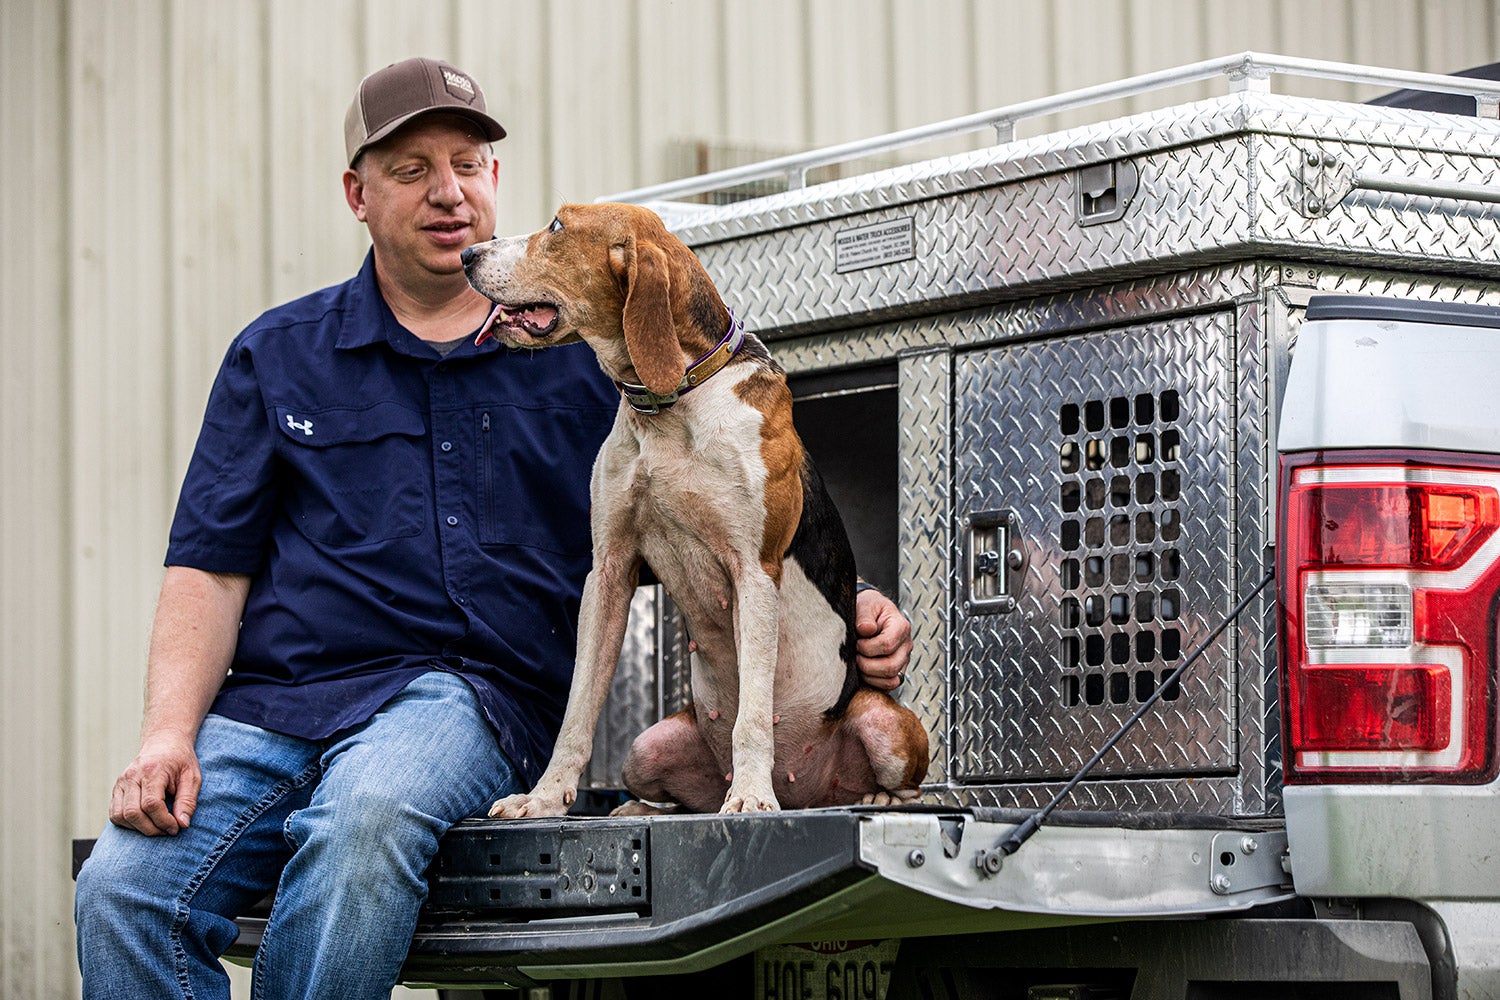 Greg Maynard poses with Molly on truck tailgate